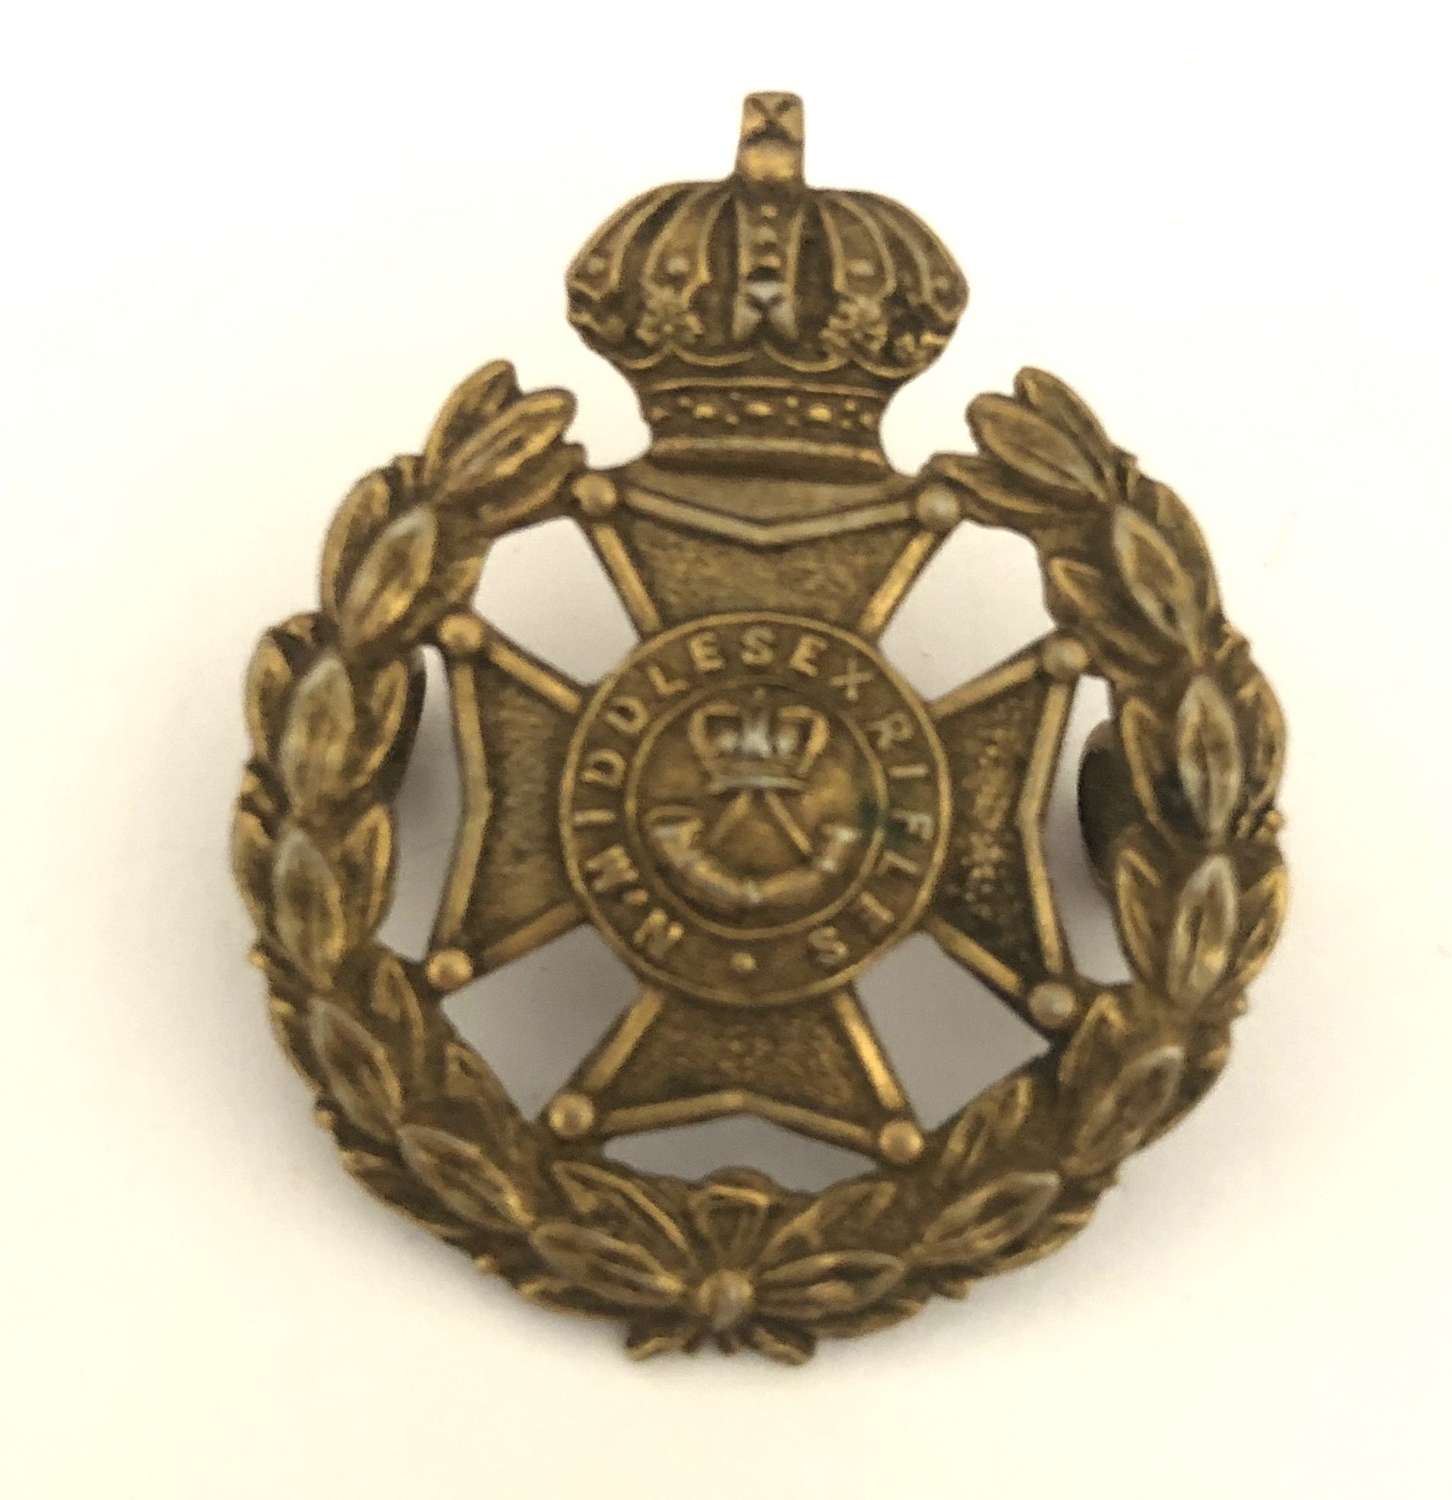 North Middlesex Rifles Victorian field service cap badge